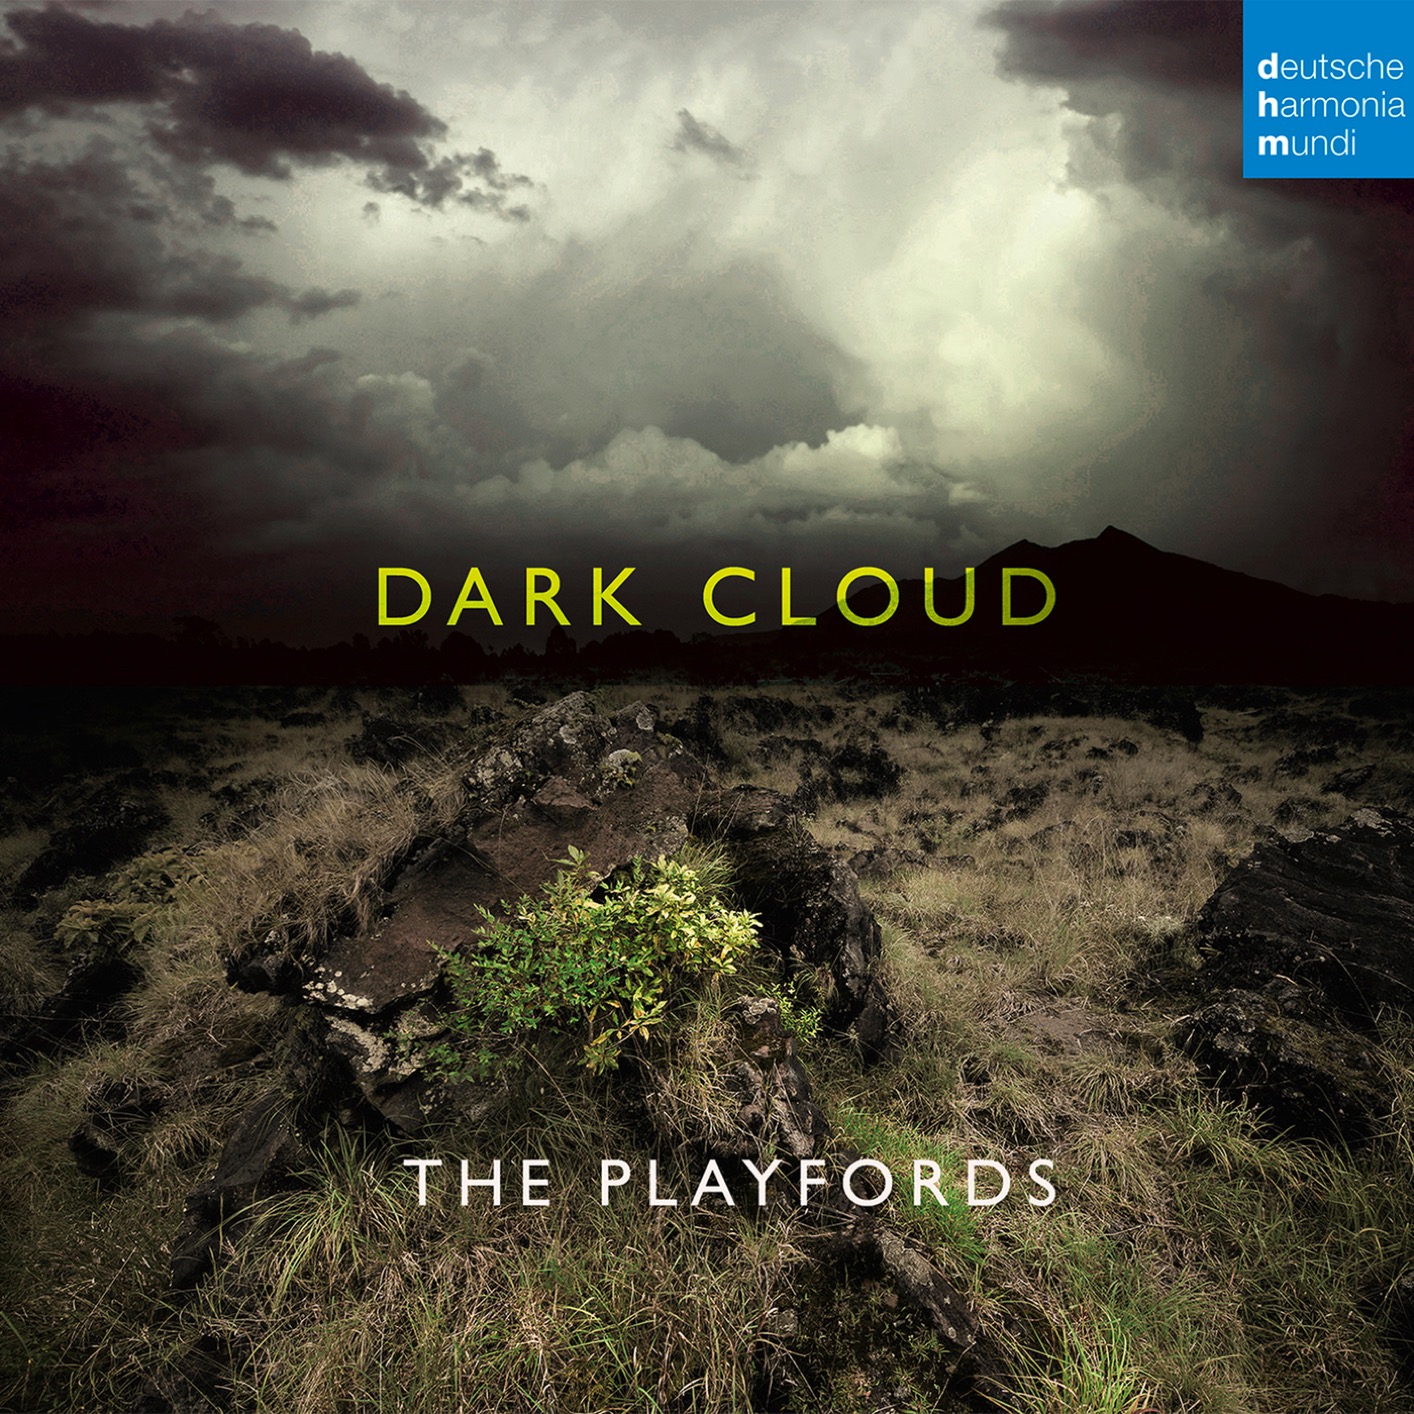 The Playfords – Dark Cloud: Songs from the Thirty Years’ War 1618-1648 (2019) [FLAC 24bit/96kHz]